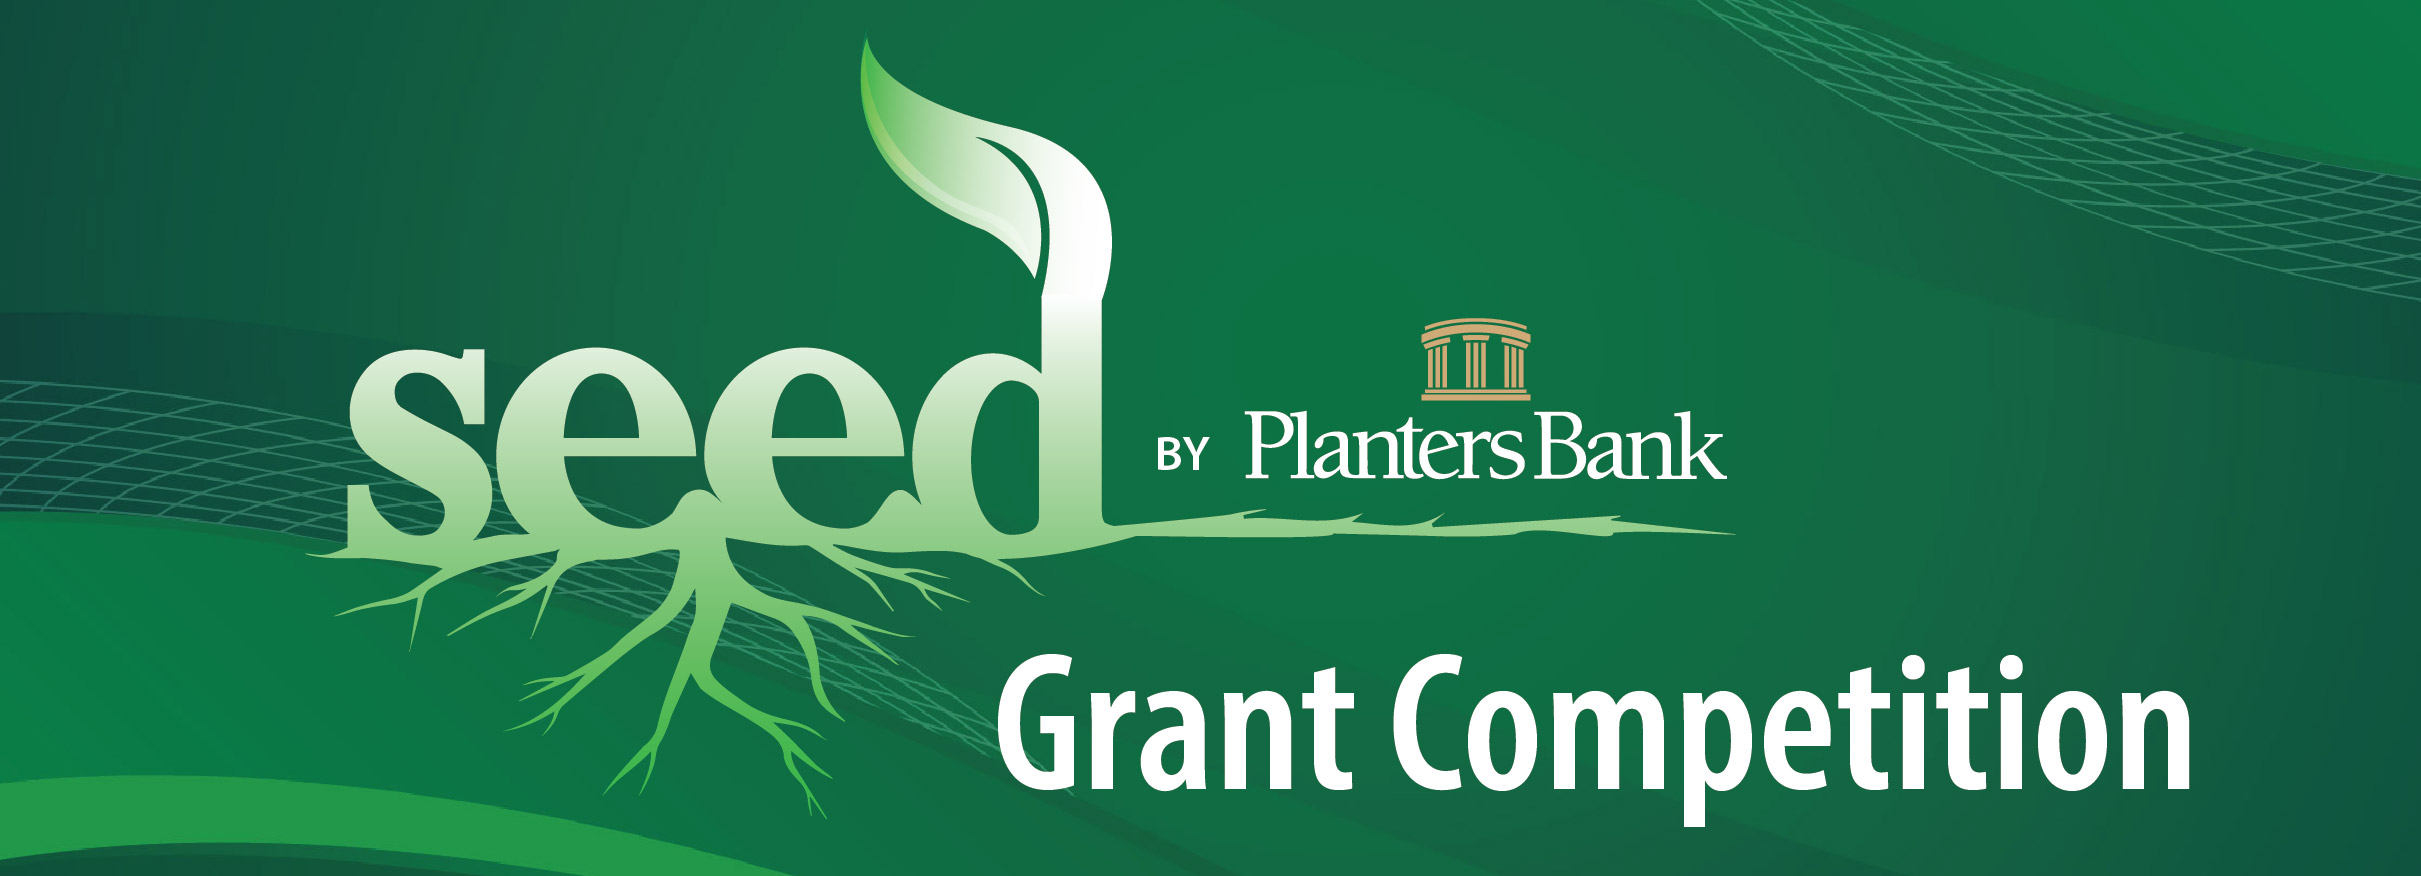 SEED Grant Web Banner 2